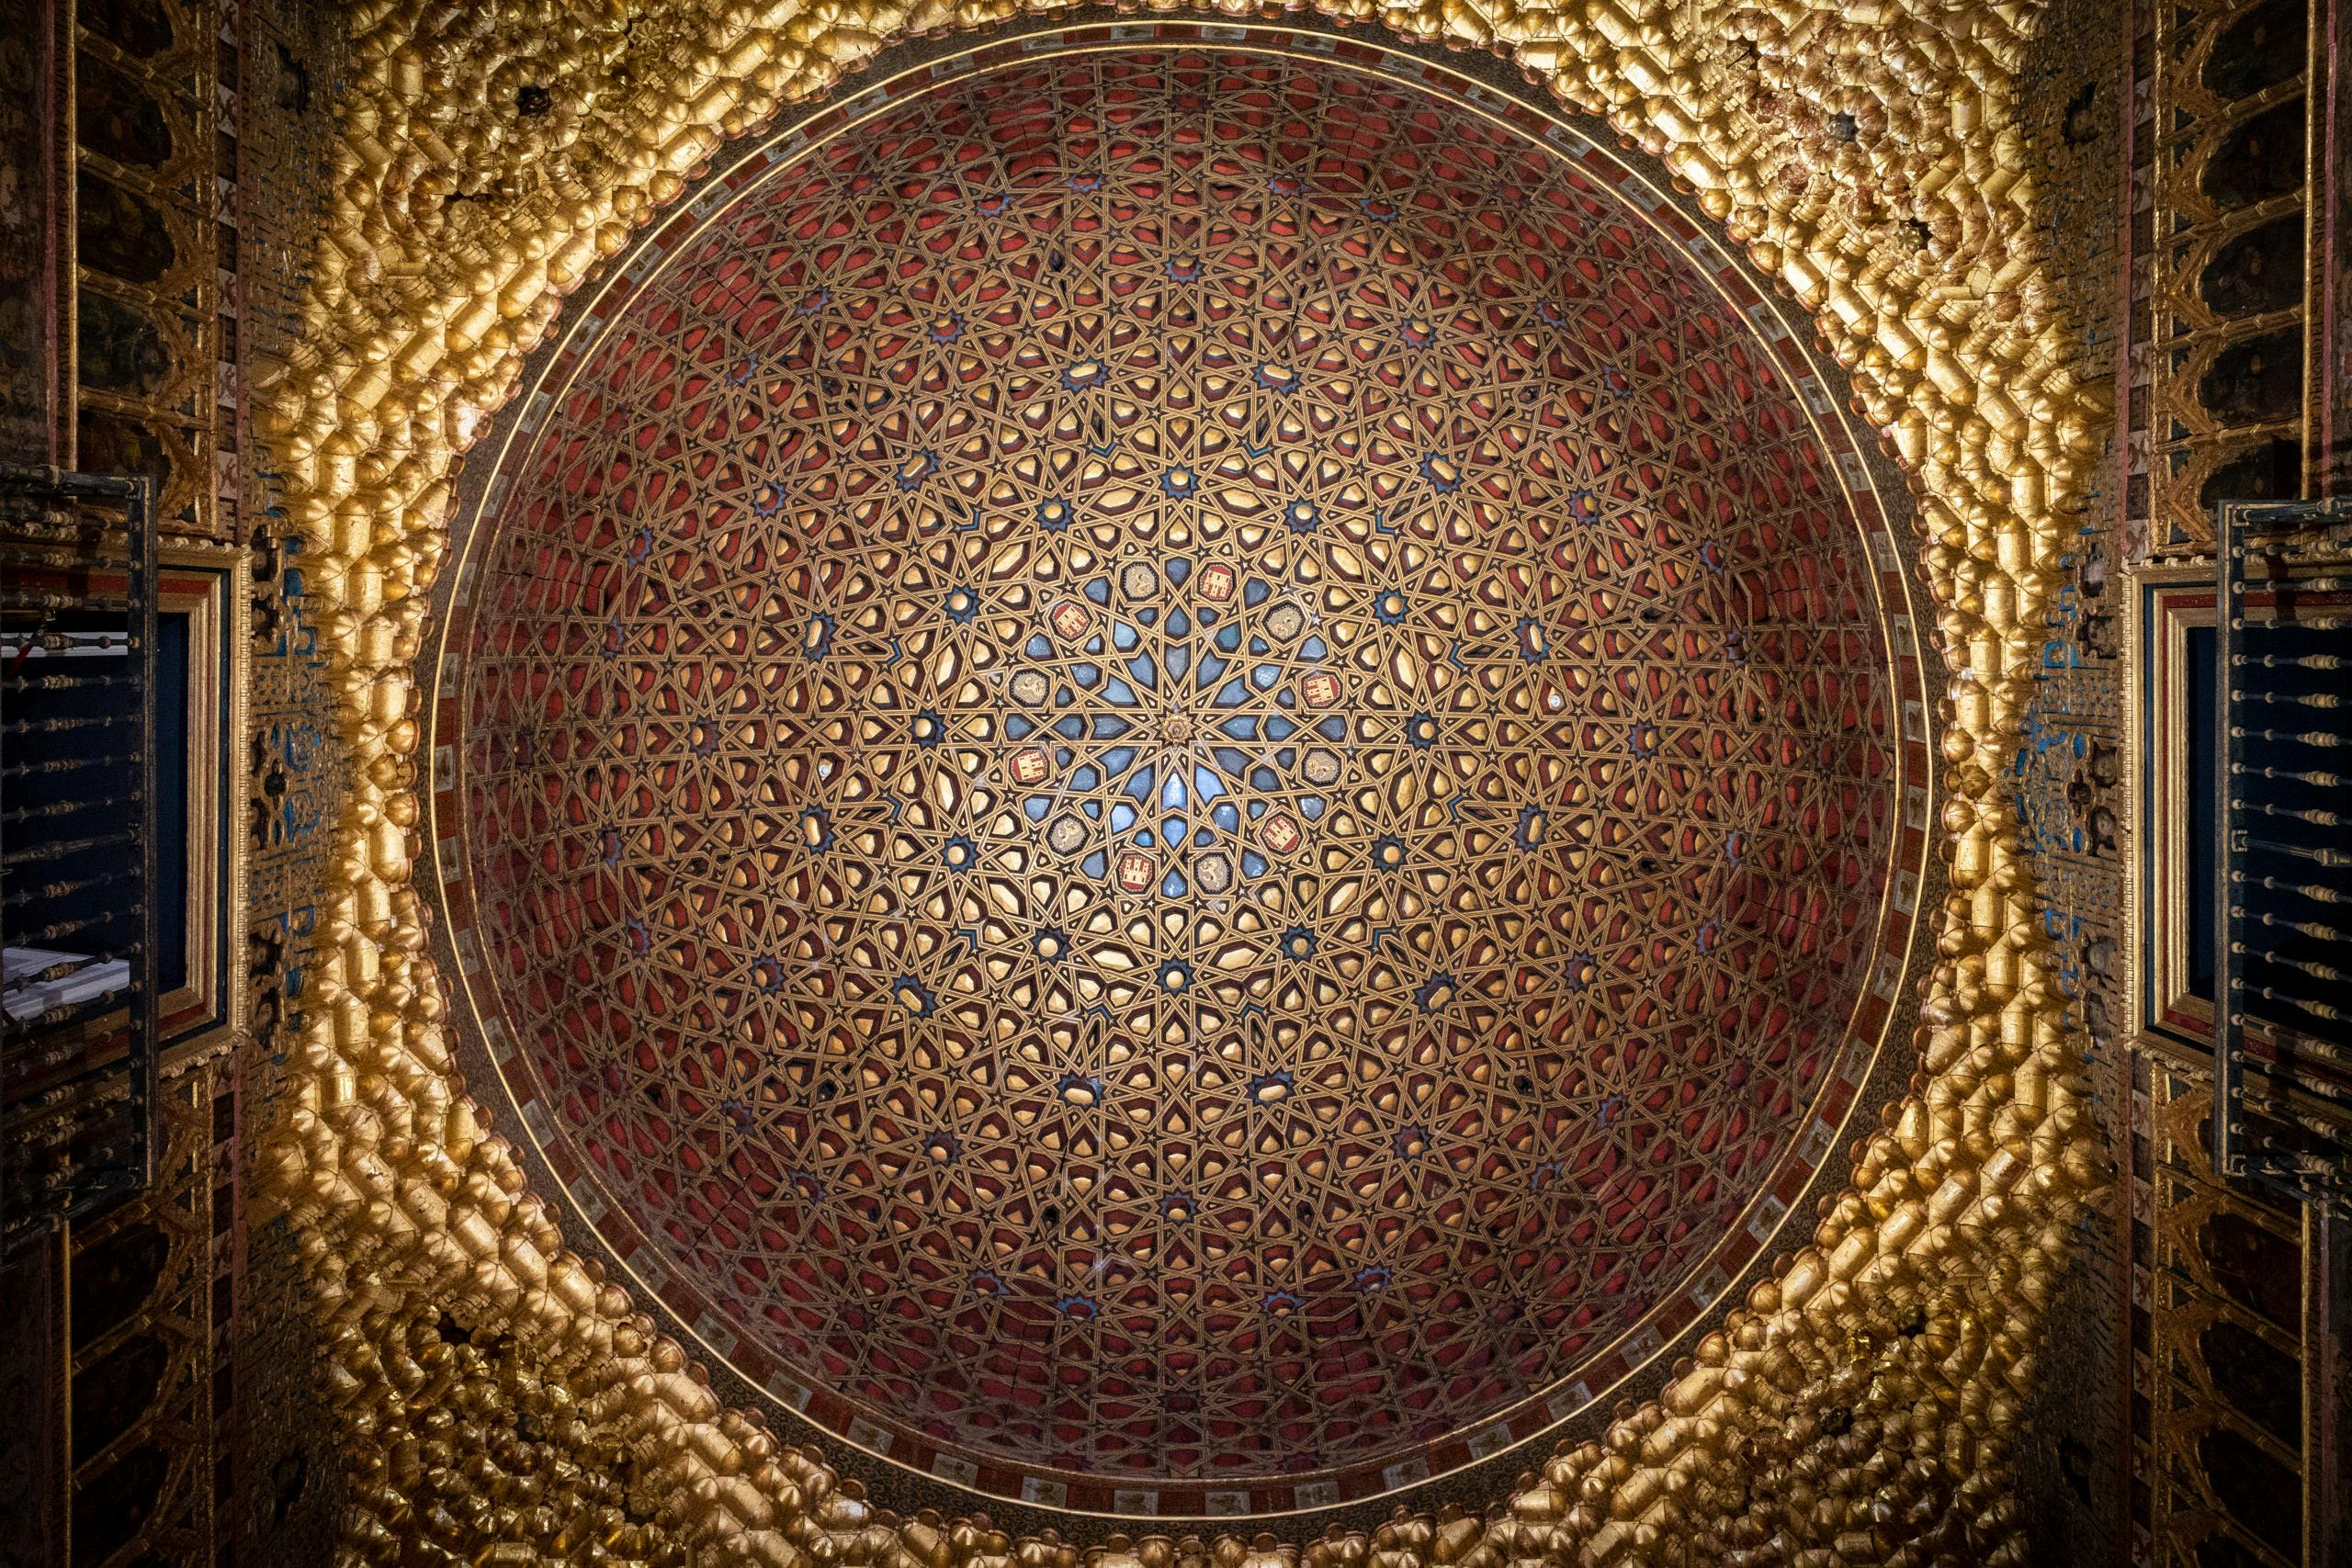 Ceiling with intricate radial patterns